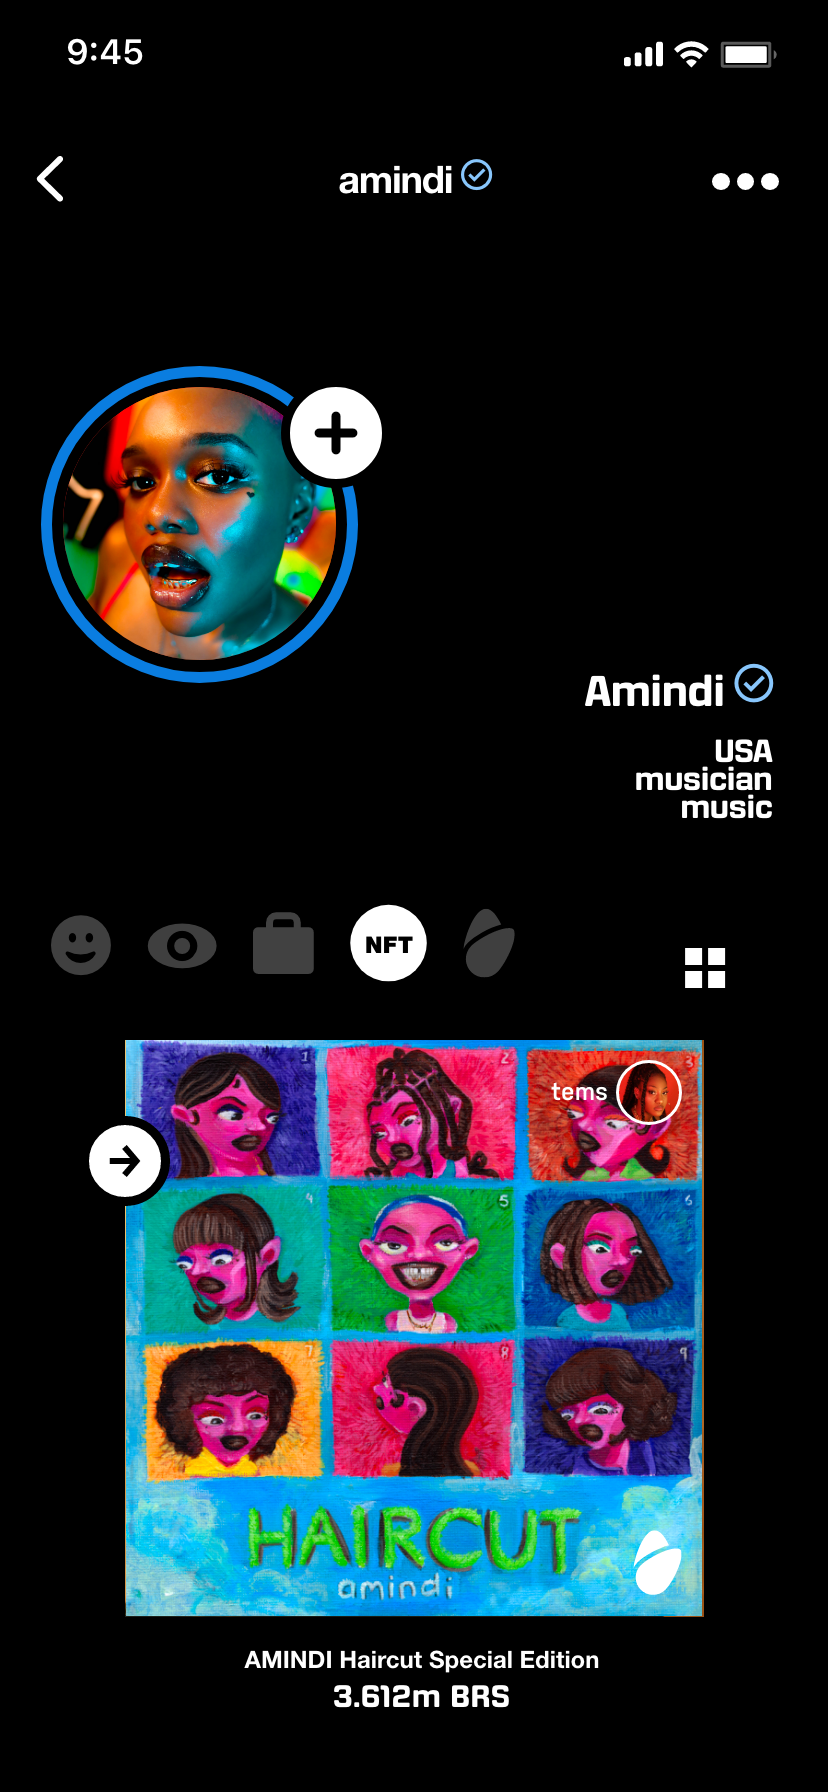 a screenshot of the artist page for the musician amindi, pictured with dark lipstick and smokey eye makeup, along with nfts for sale